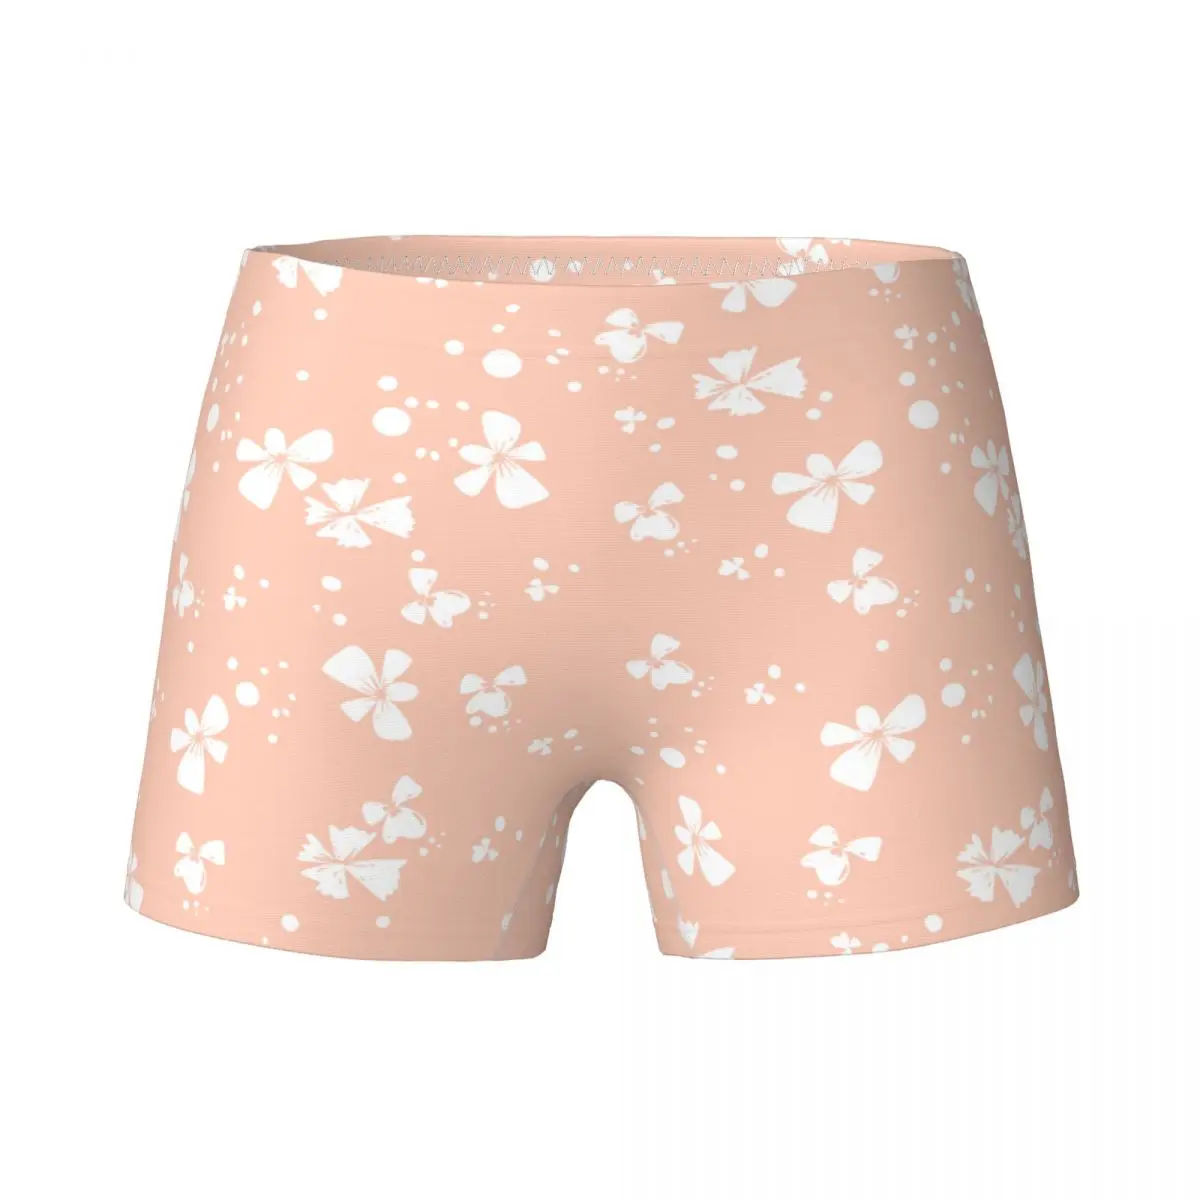 

Youth Girls Floral Flowers Boxer Child Cotton Pretty Underwear Kids Teenagers Underpants Briefs 4-15Y